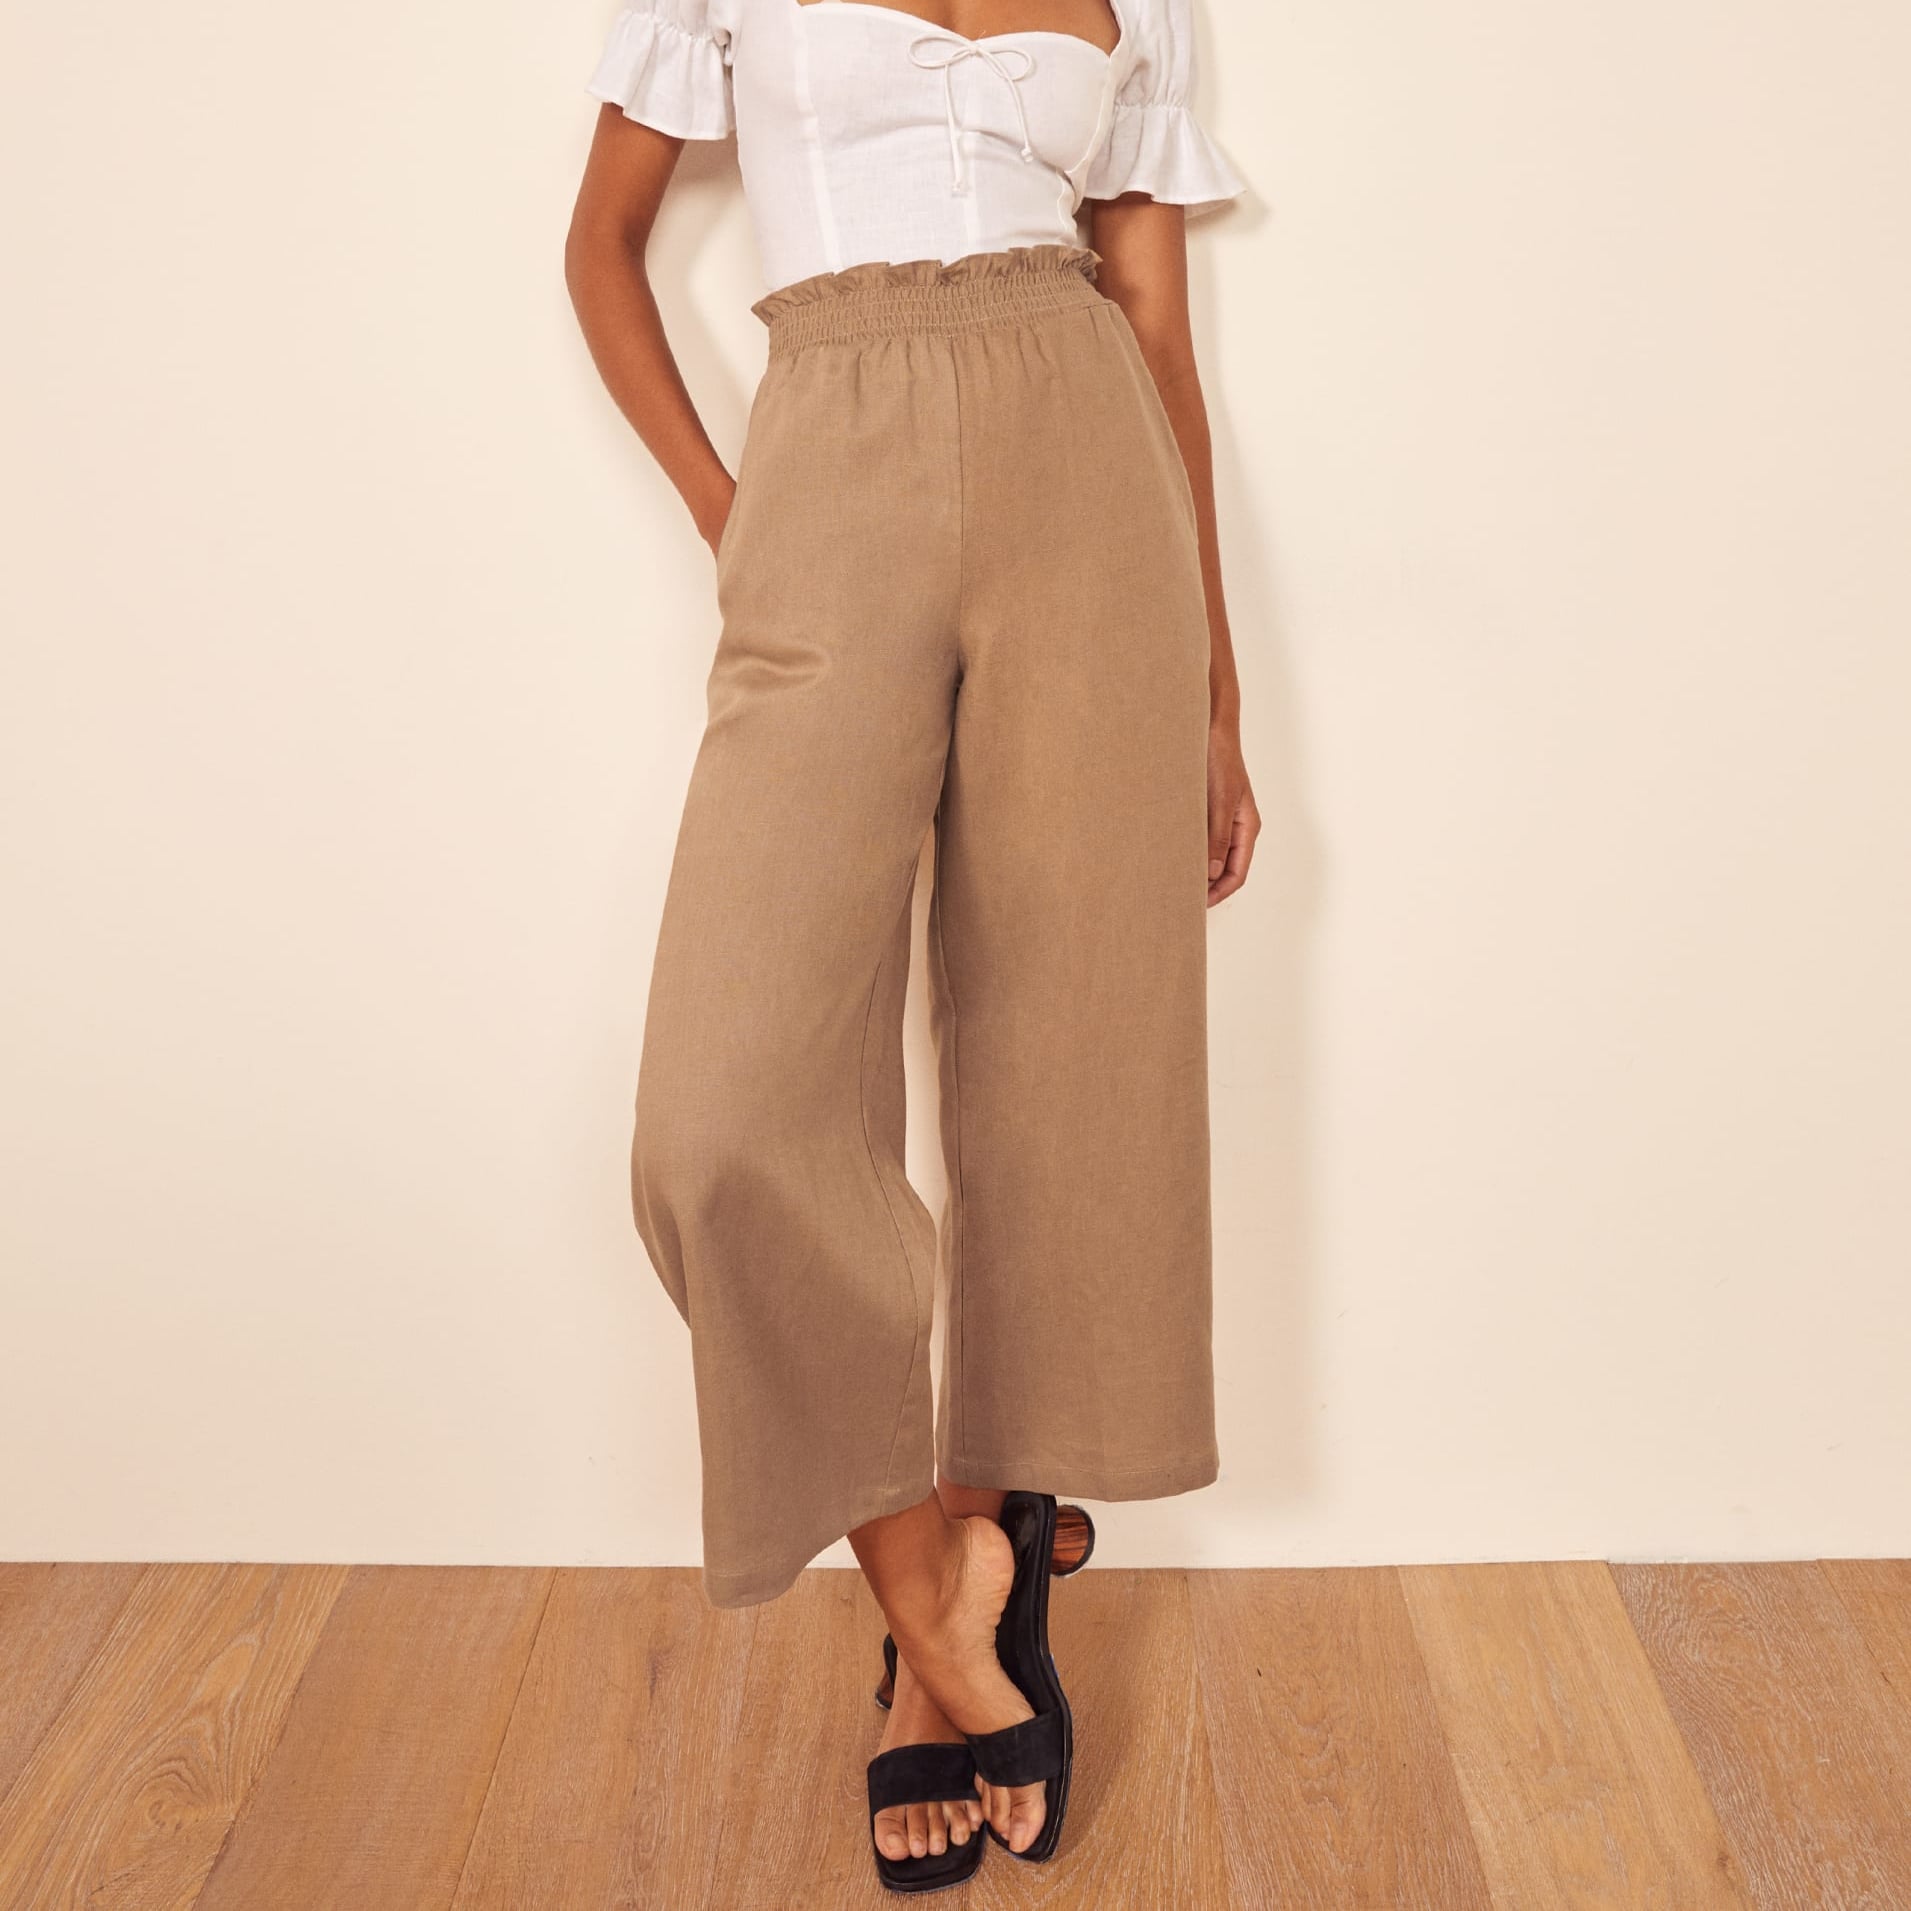 Womens Solid Color Pants,ASTV Fashion Ladies Pure Color Mid Waist Casual Summer Cropped Trousers